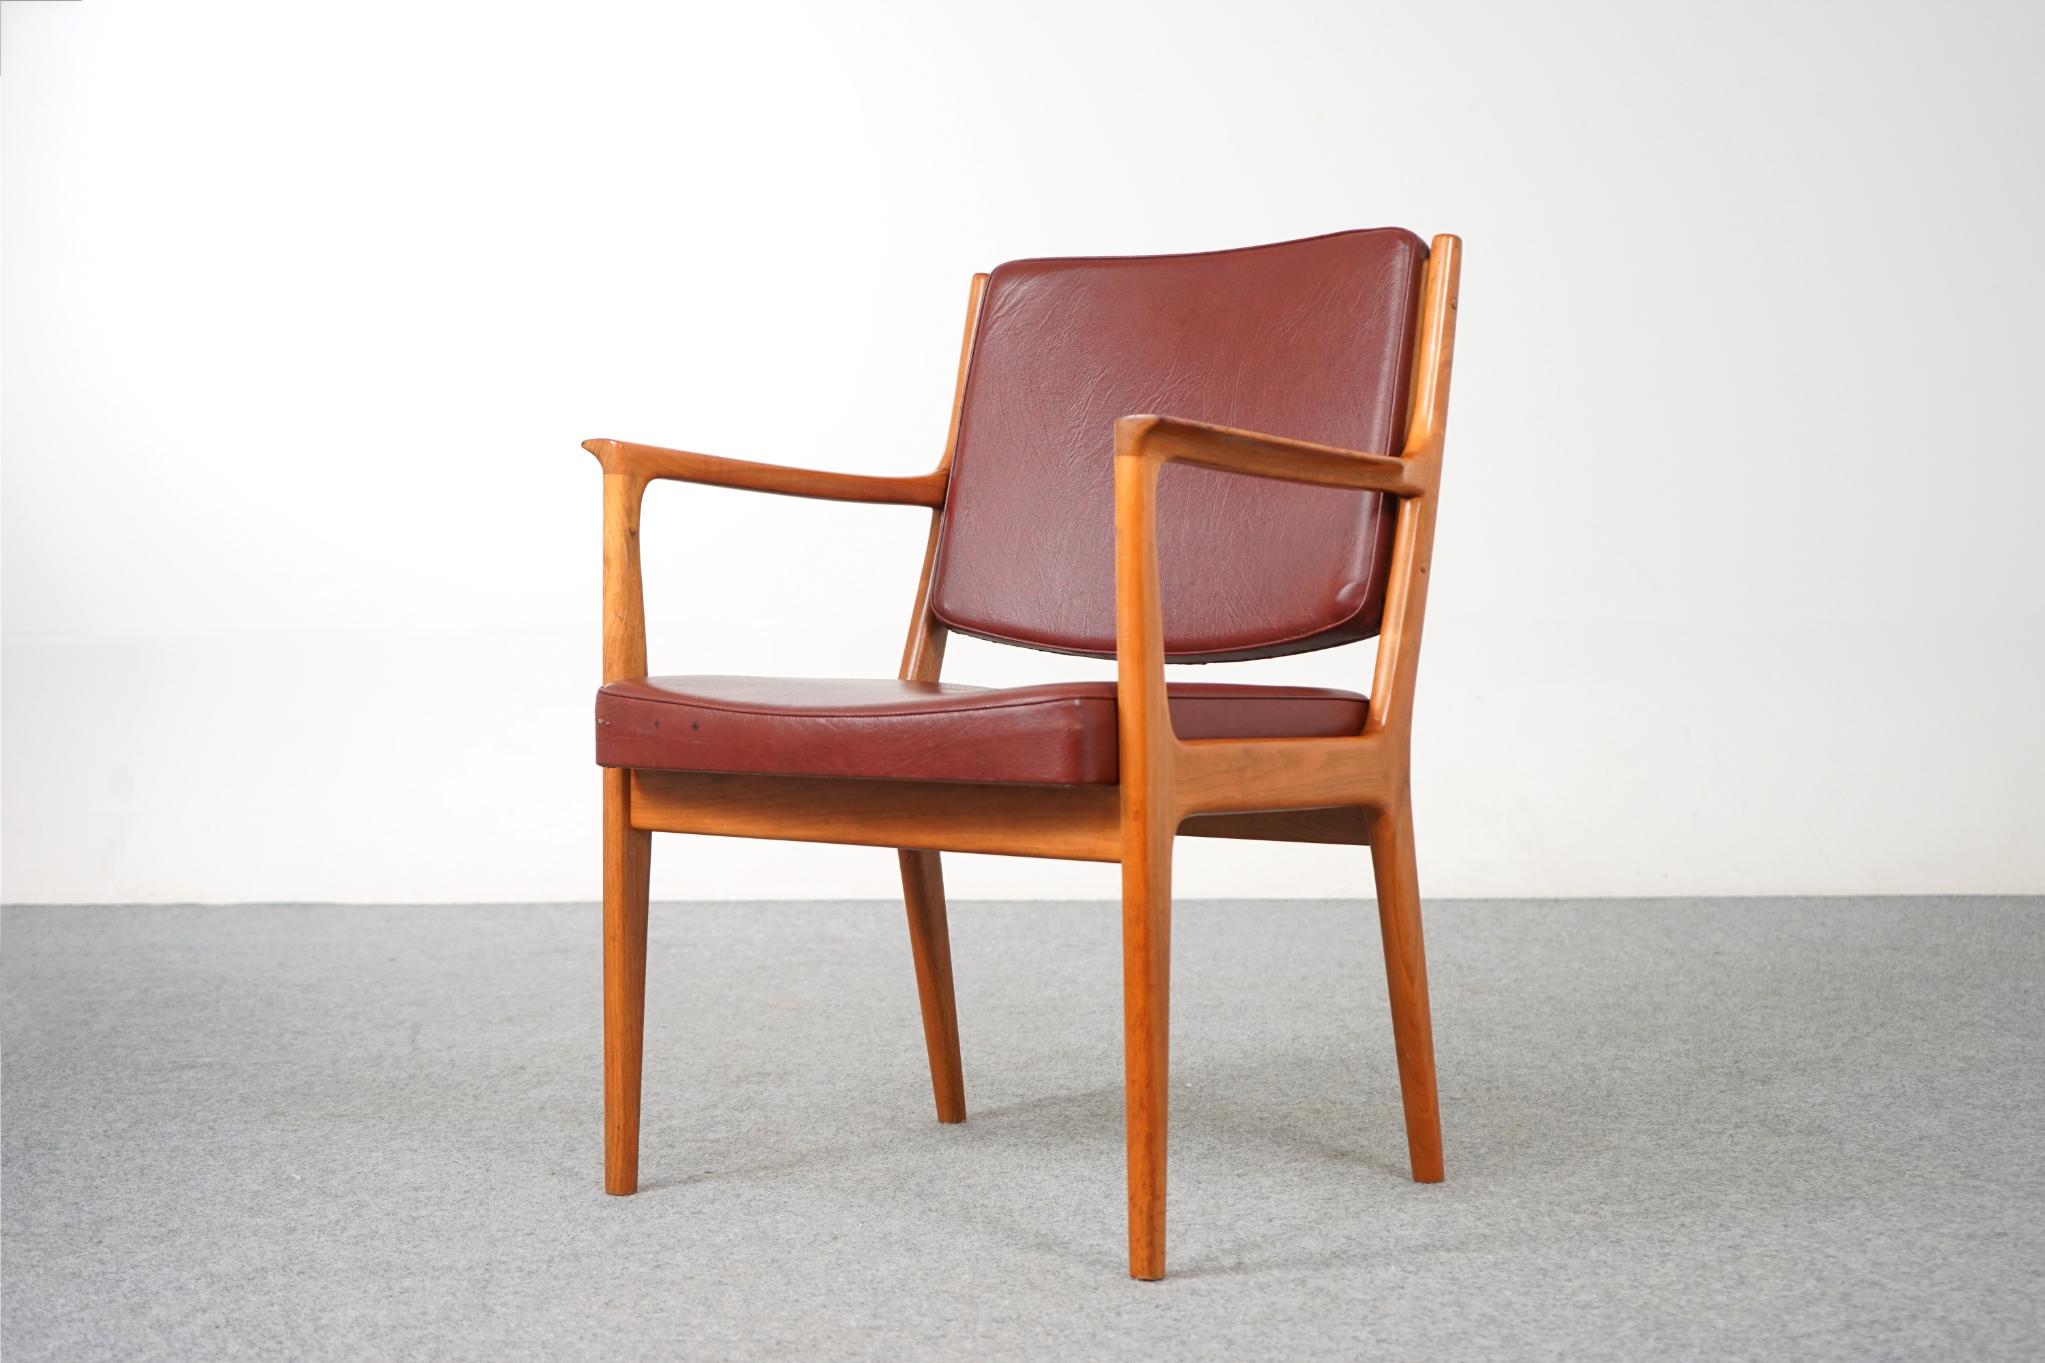 Walnut Danish armchair, circa 1970's. Sturdy solid wood frame is wonderfully scaled for your many seating needs, home or office! The elegant frame with swooping arms makes this clean modern design easy to combine with other furniture. 

Relax in